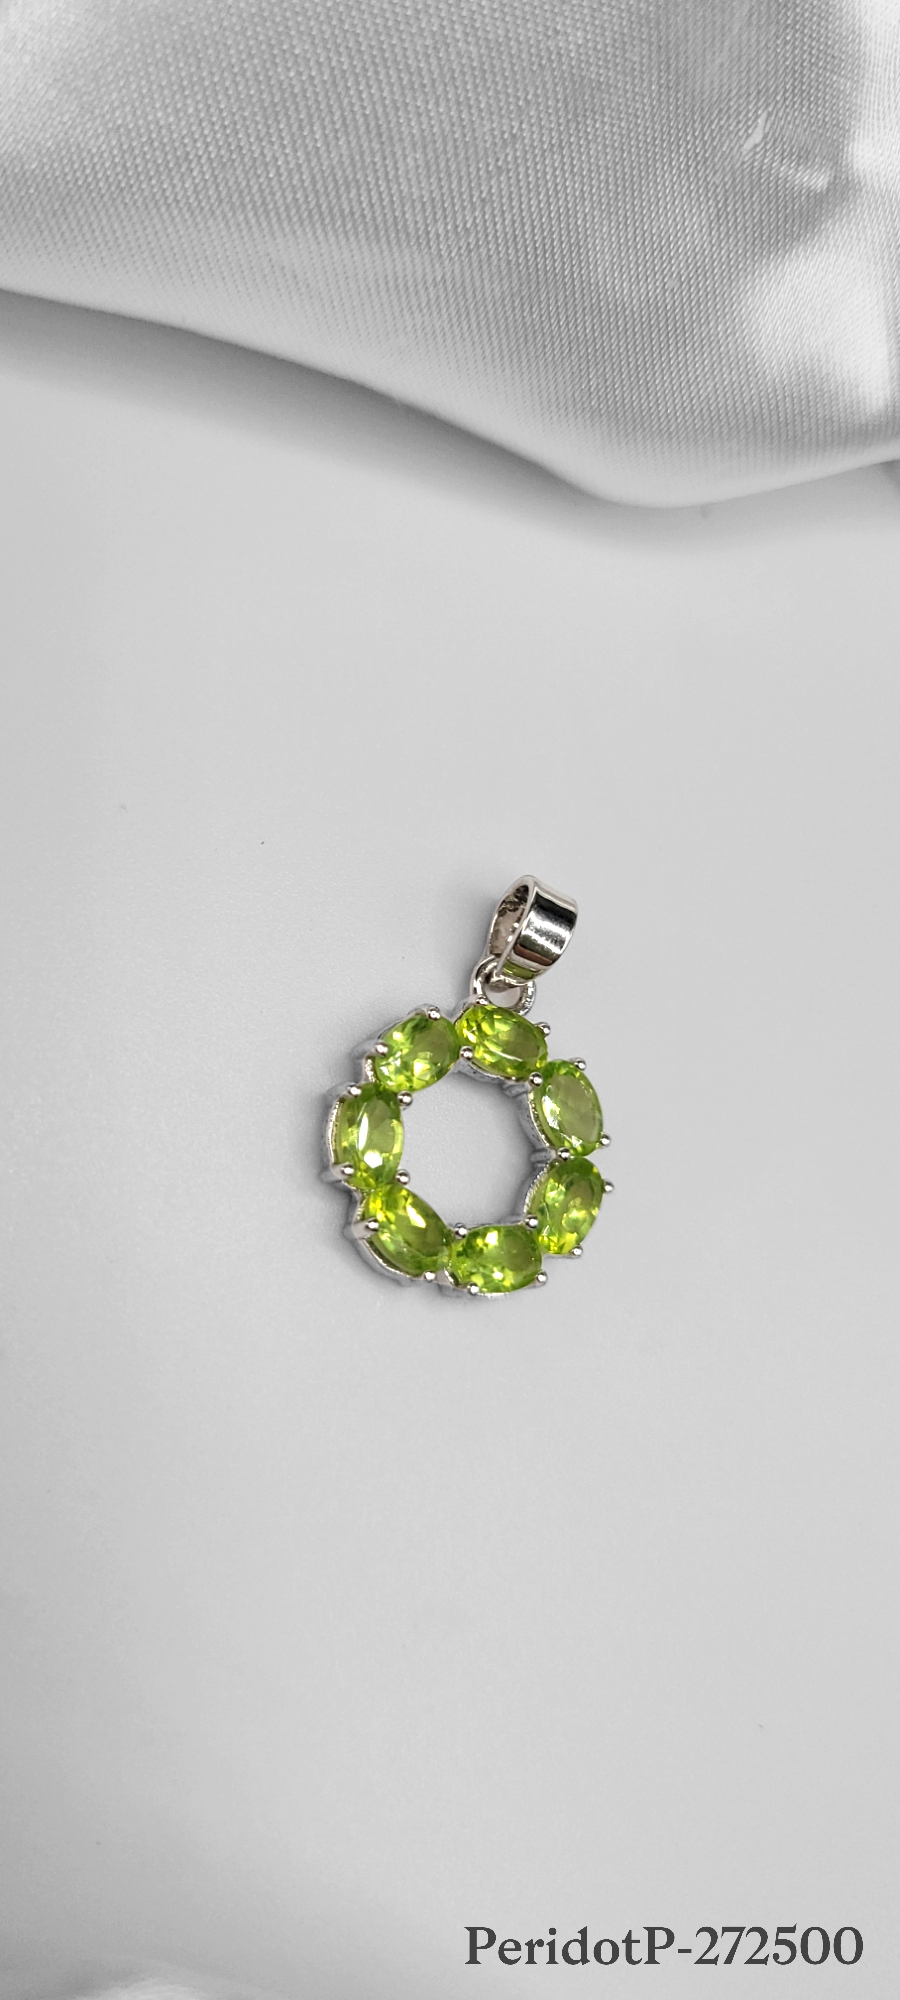 BEAUTIFUL PERIDOT STONE PENDANT ON STERLING SILVER. PERIDOT IS KNOWN AS THE STONE OF COMPASSION.